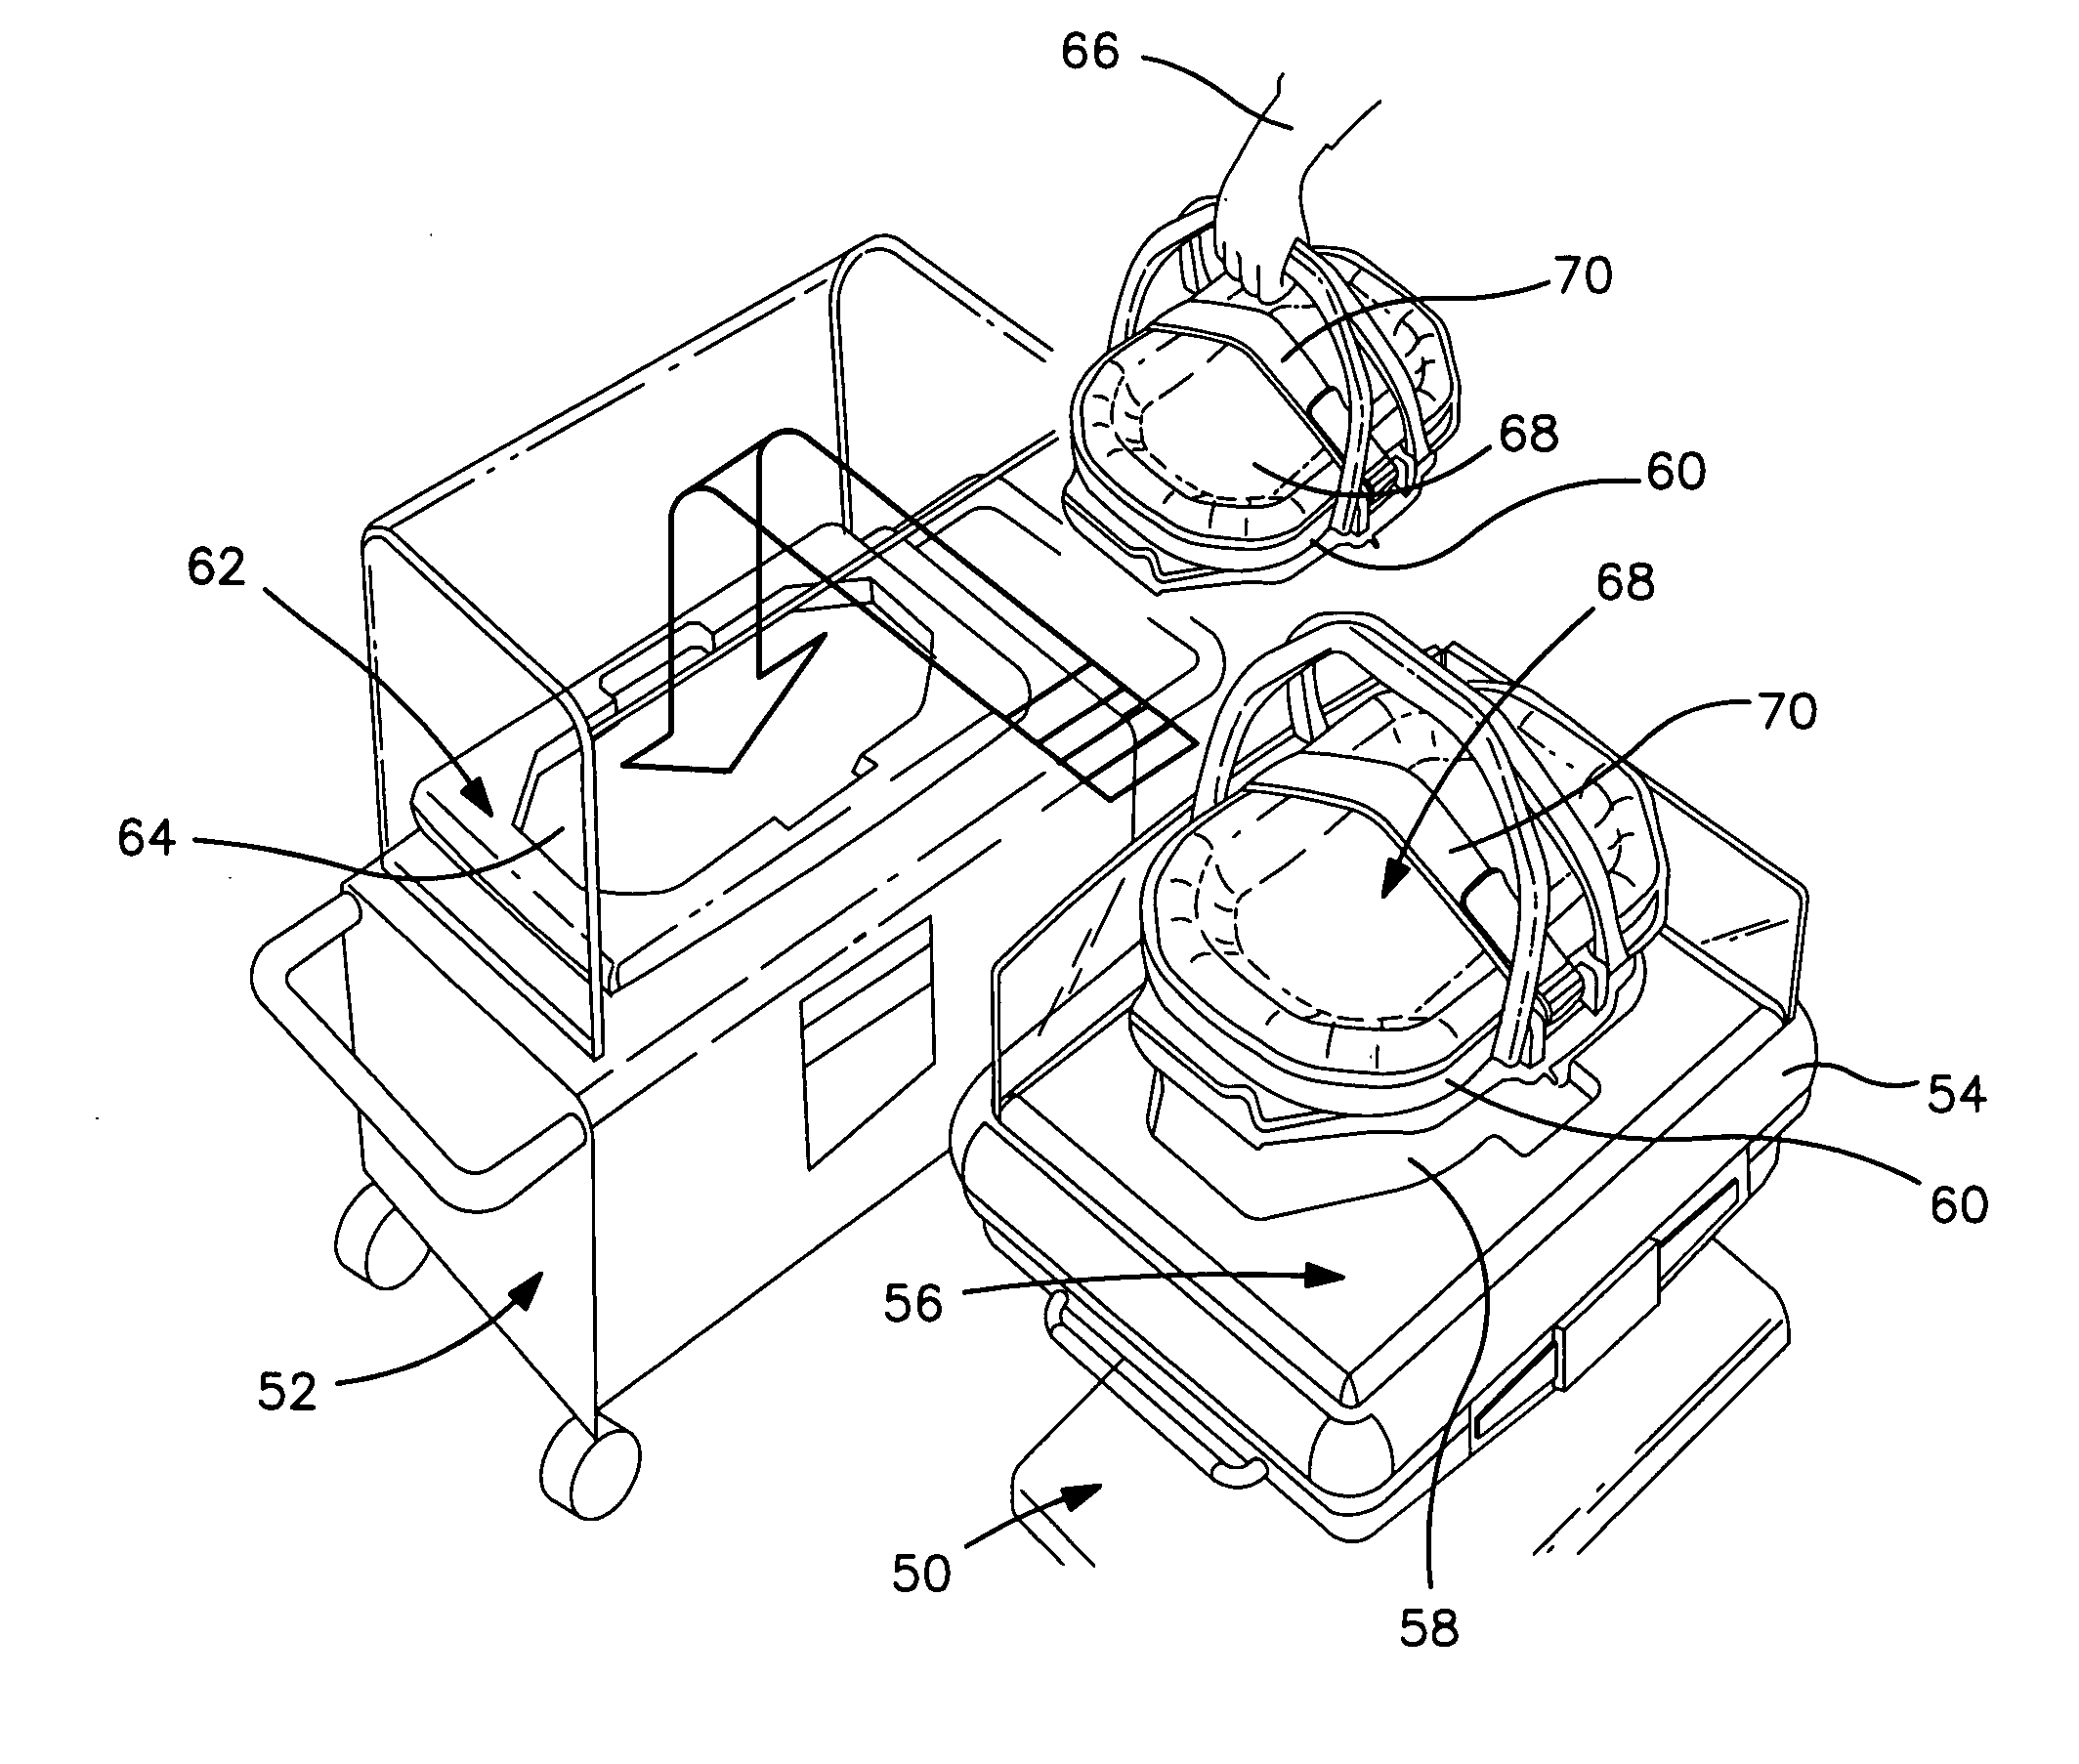 Apparatus to facilitate the transfer of patients between support platforms